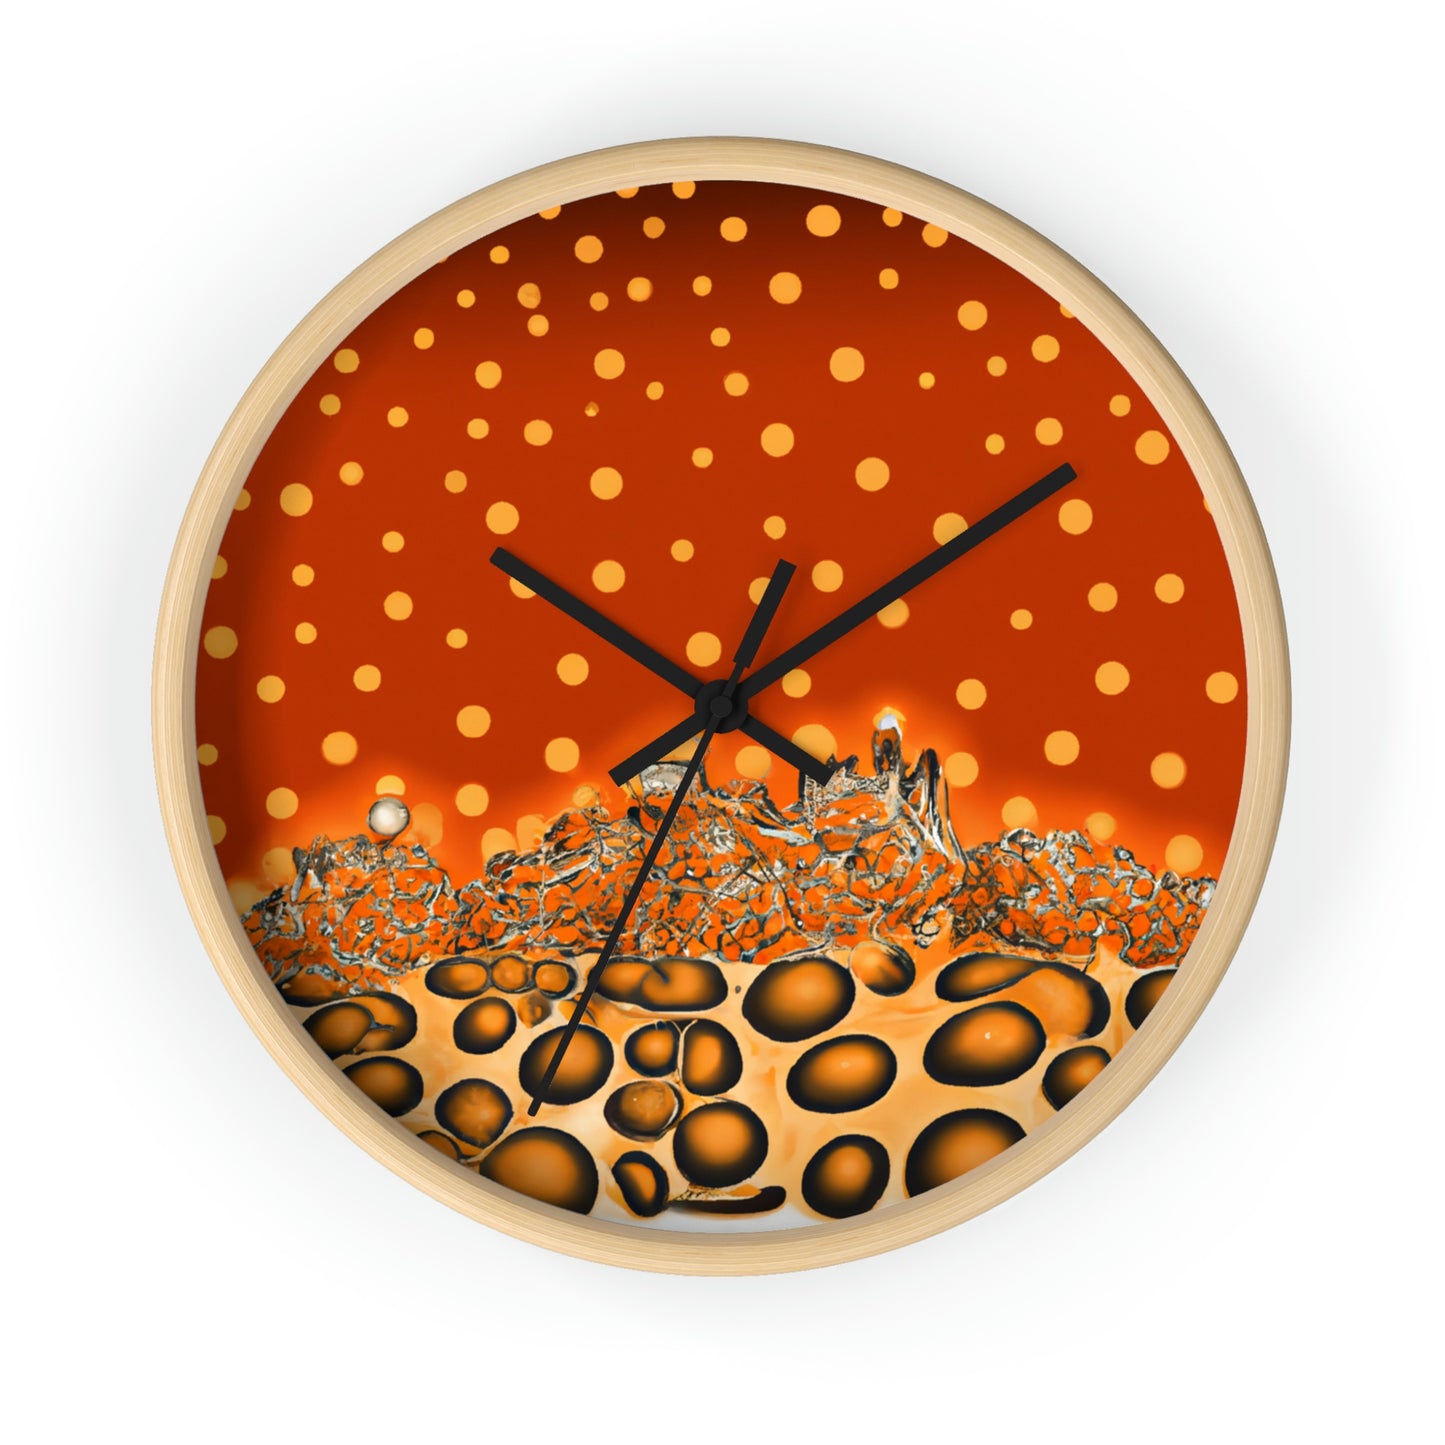 "Lost in the Sands of Time" - The Alien Wall Clock